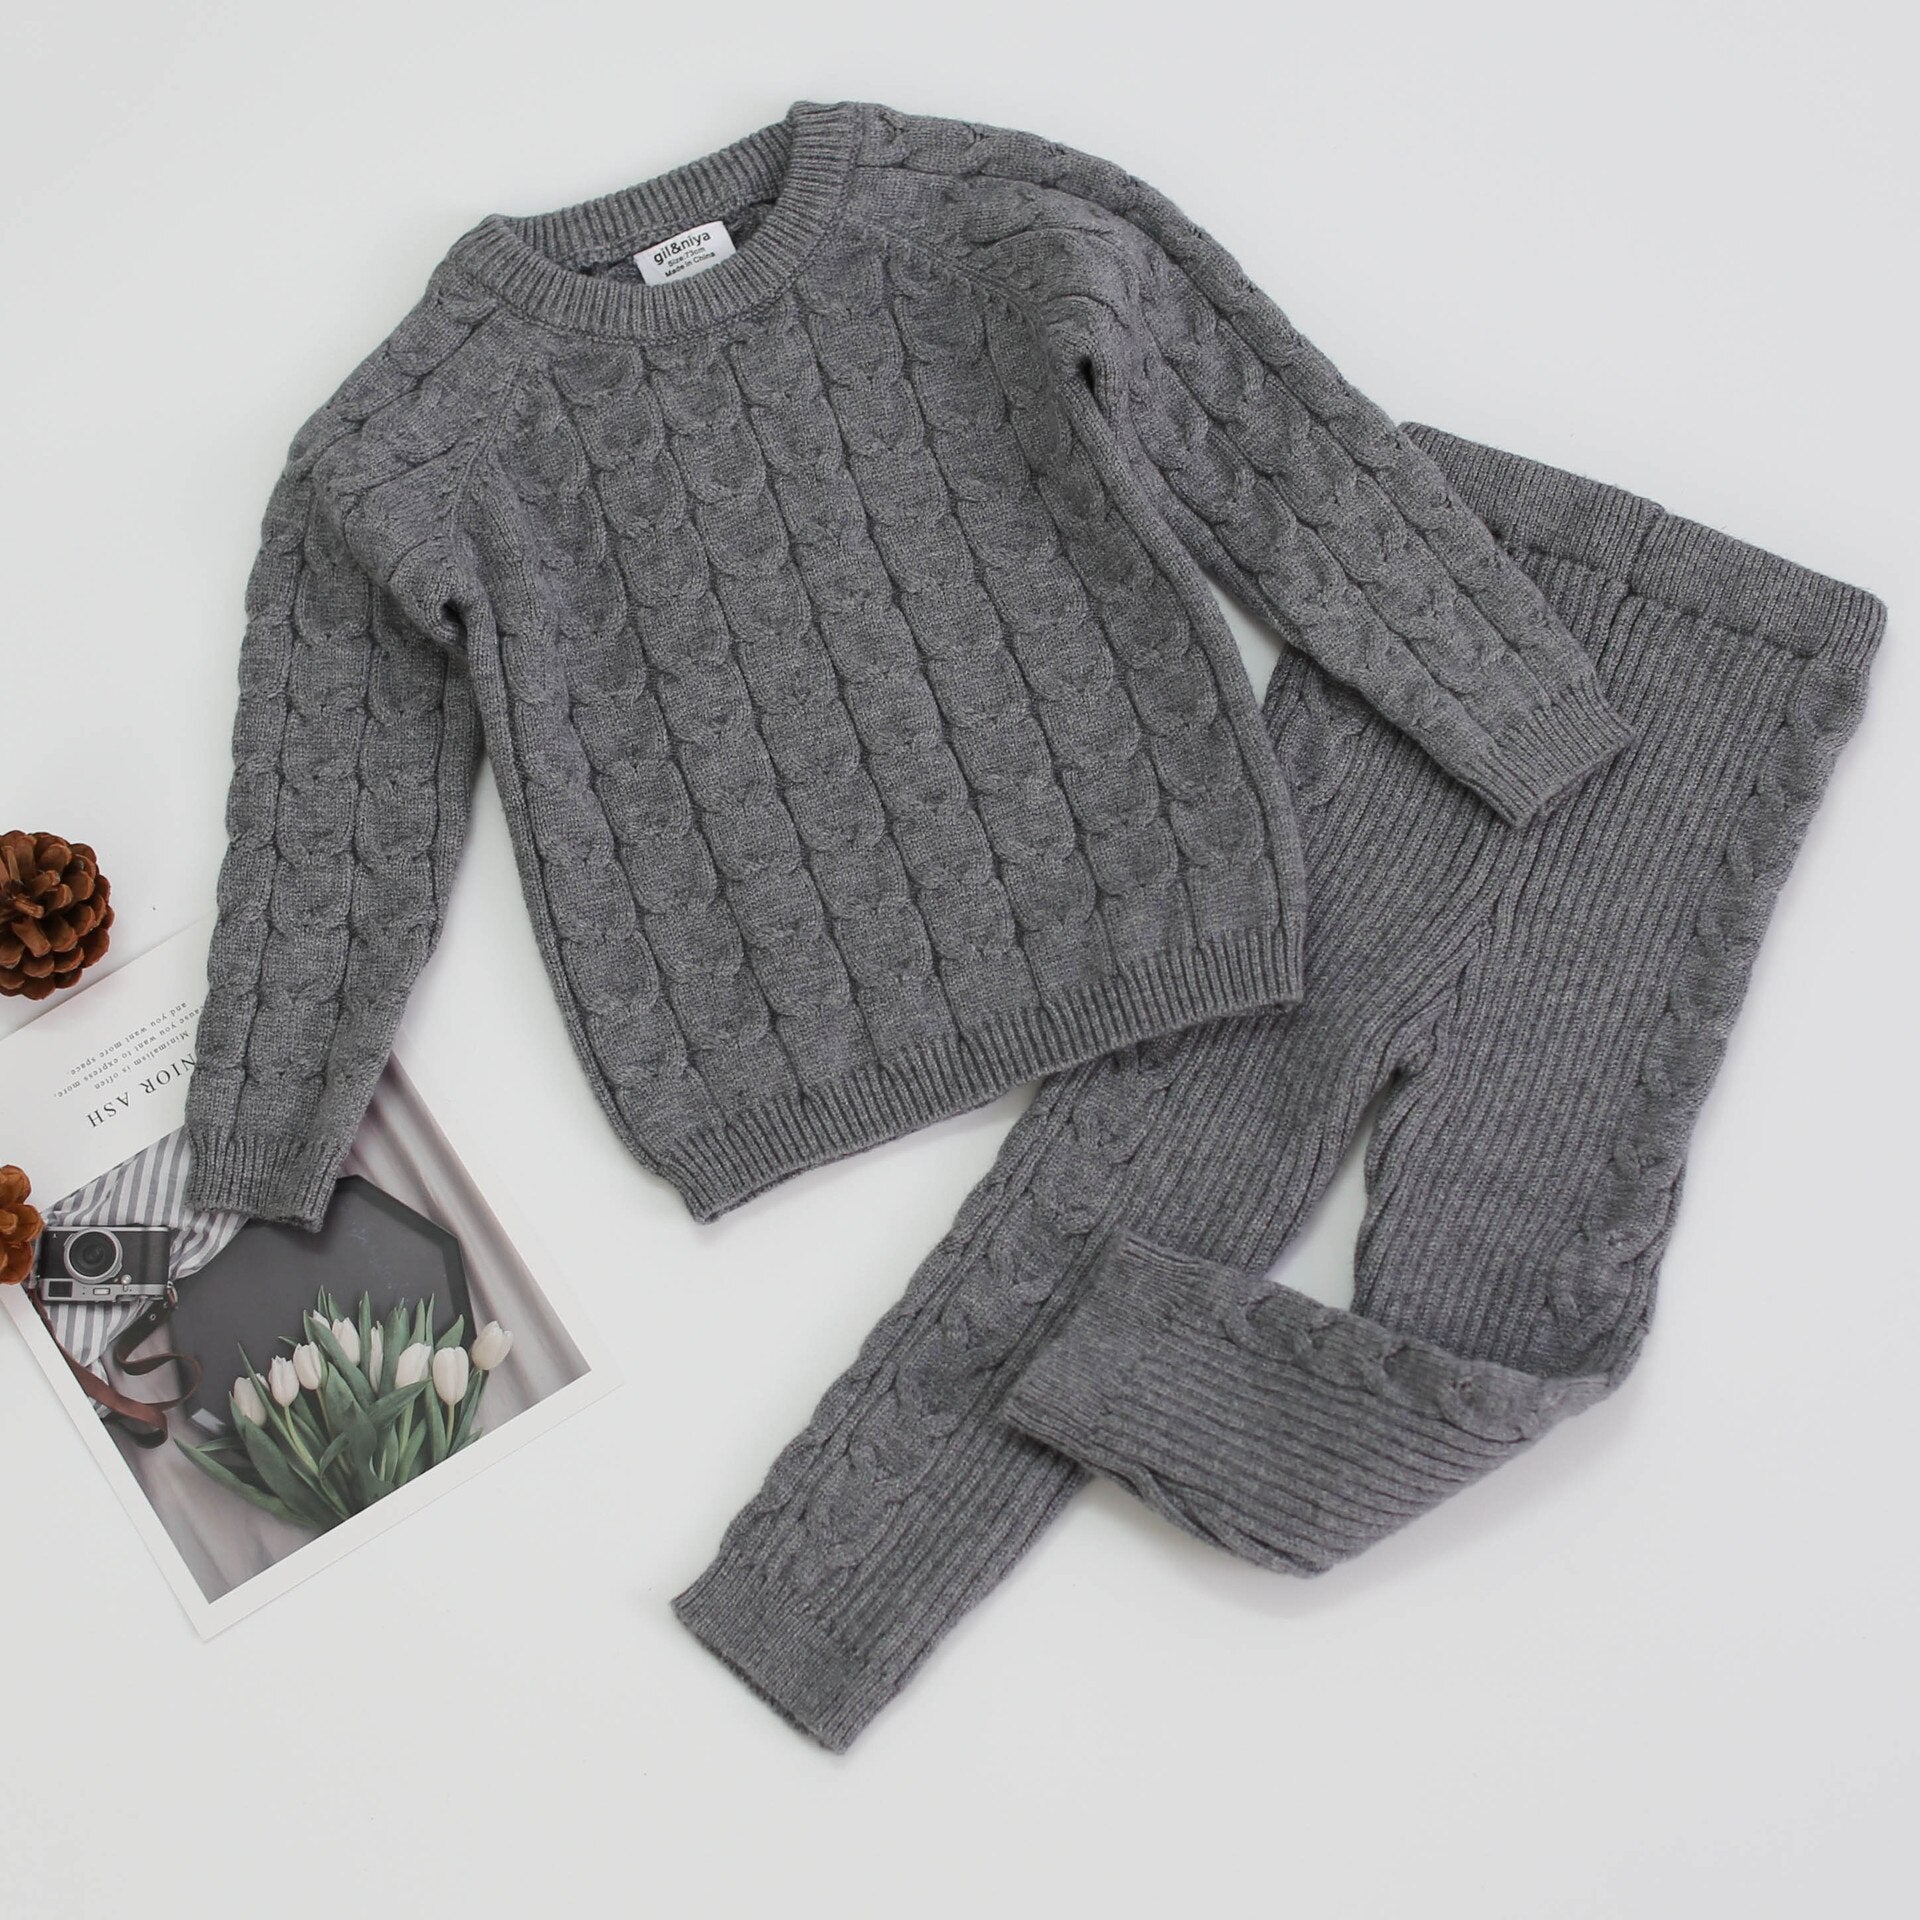 Knitted Baby Boys Girls Clothing Set, Sweater + Pants - Grey.